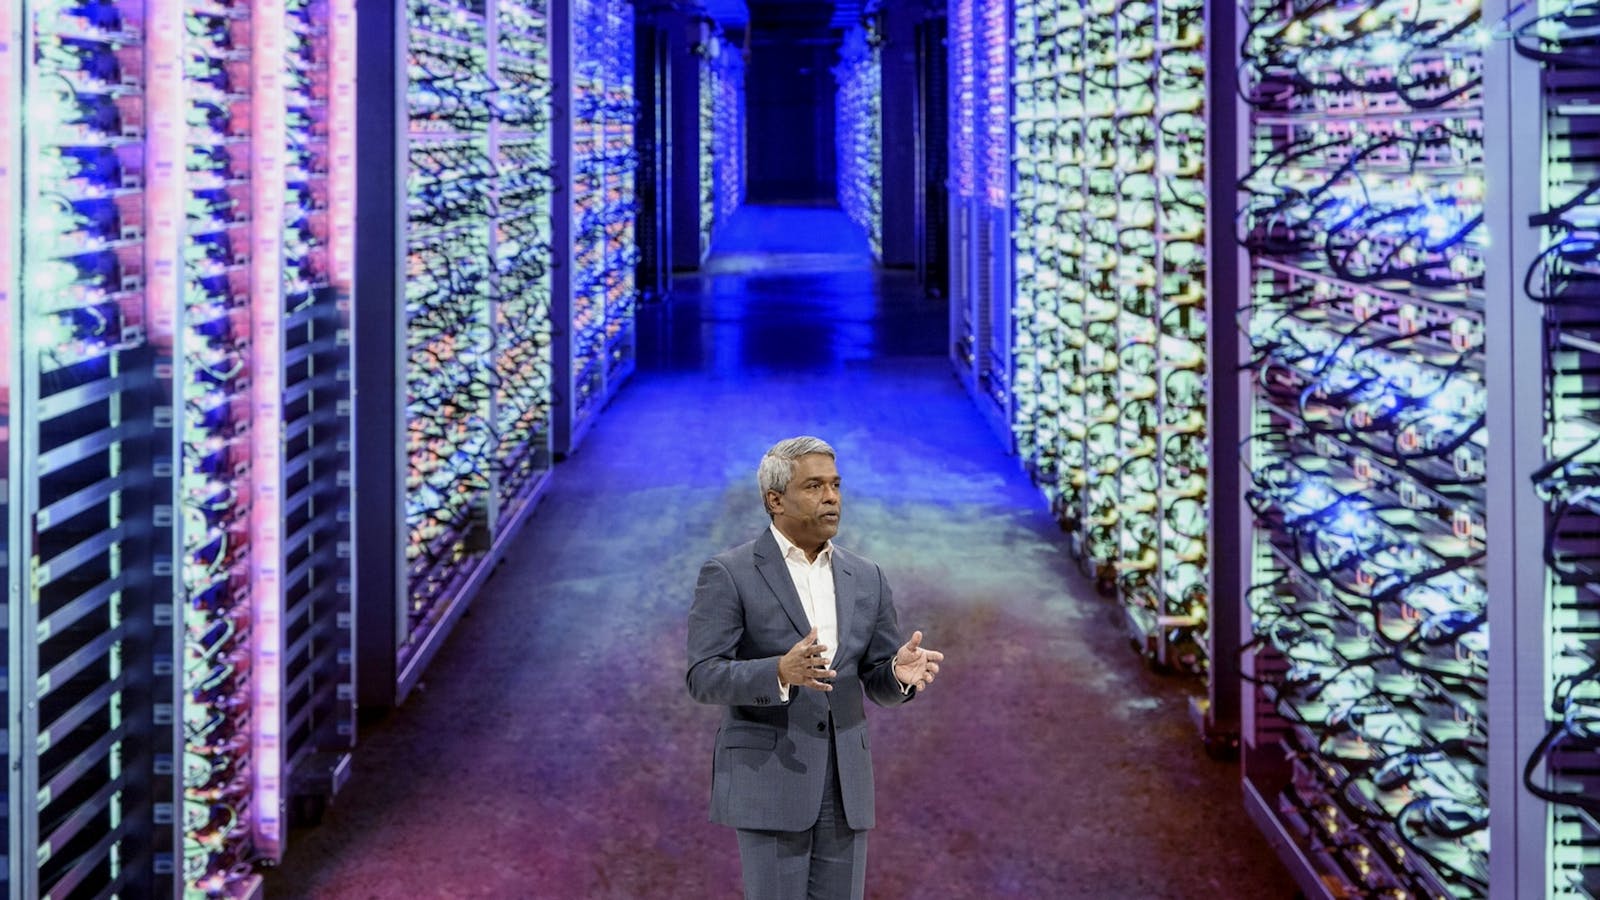 Google Cloud CEO Thomas Kurian at an event in 2019. Photo by Bloomberg